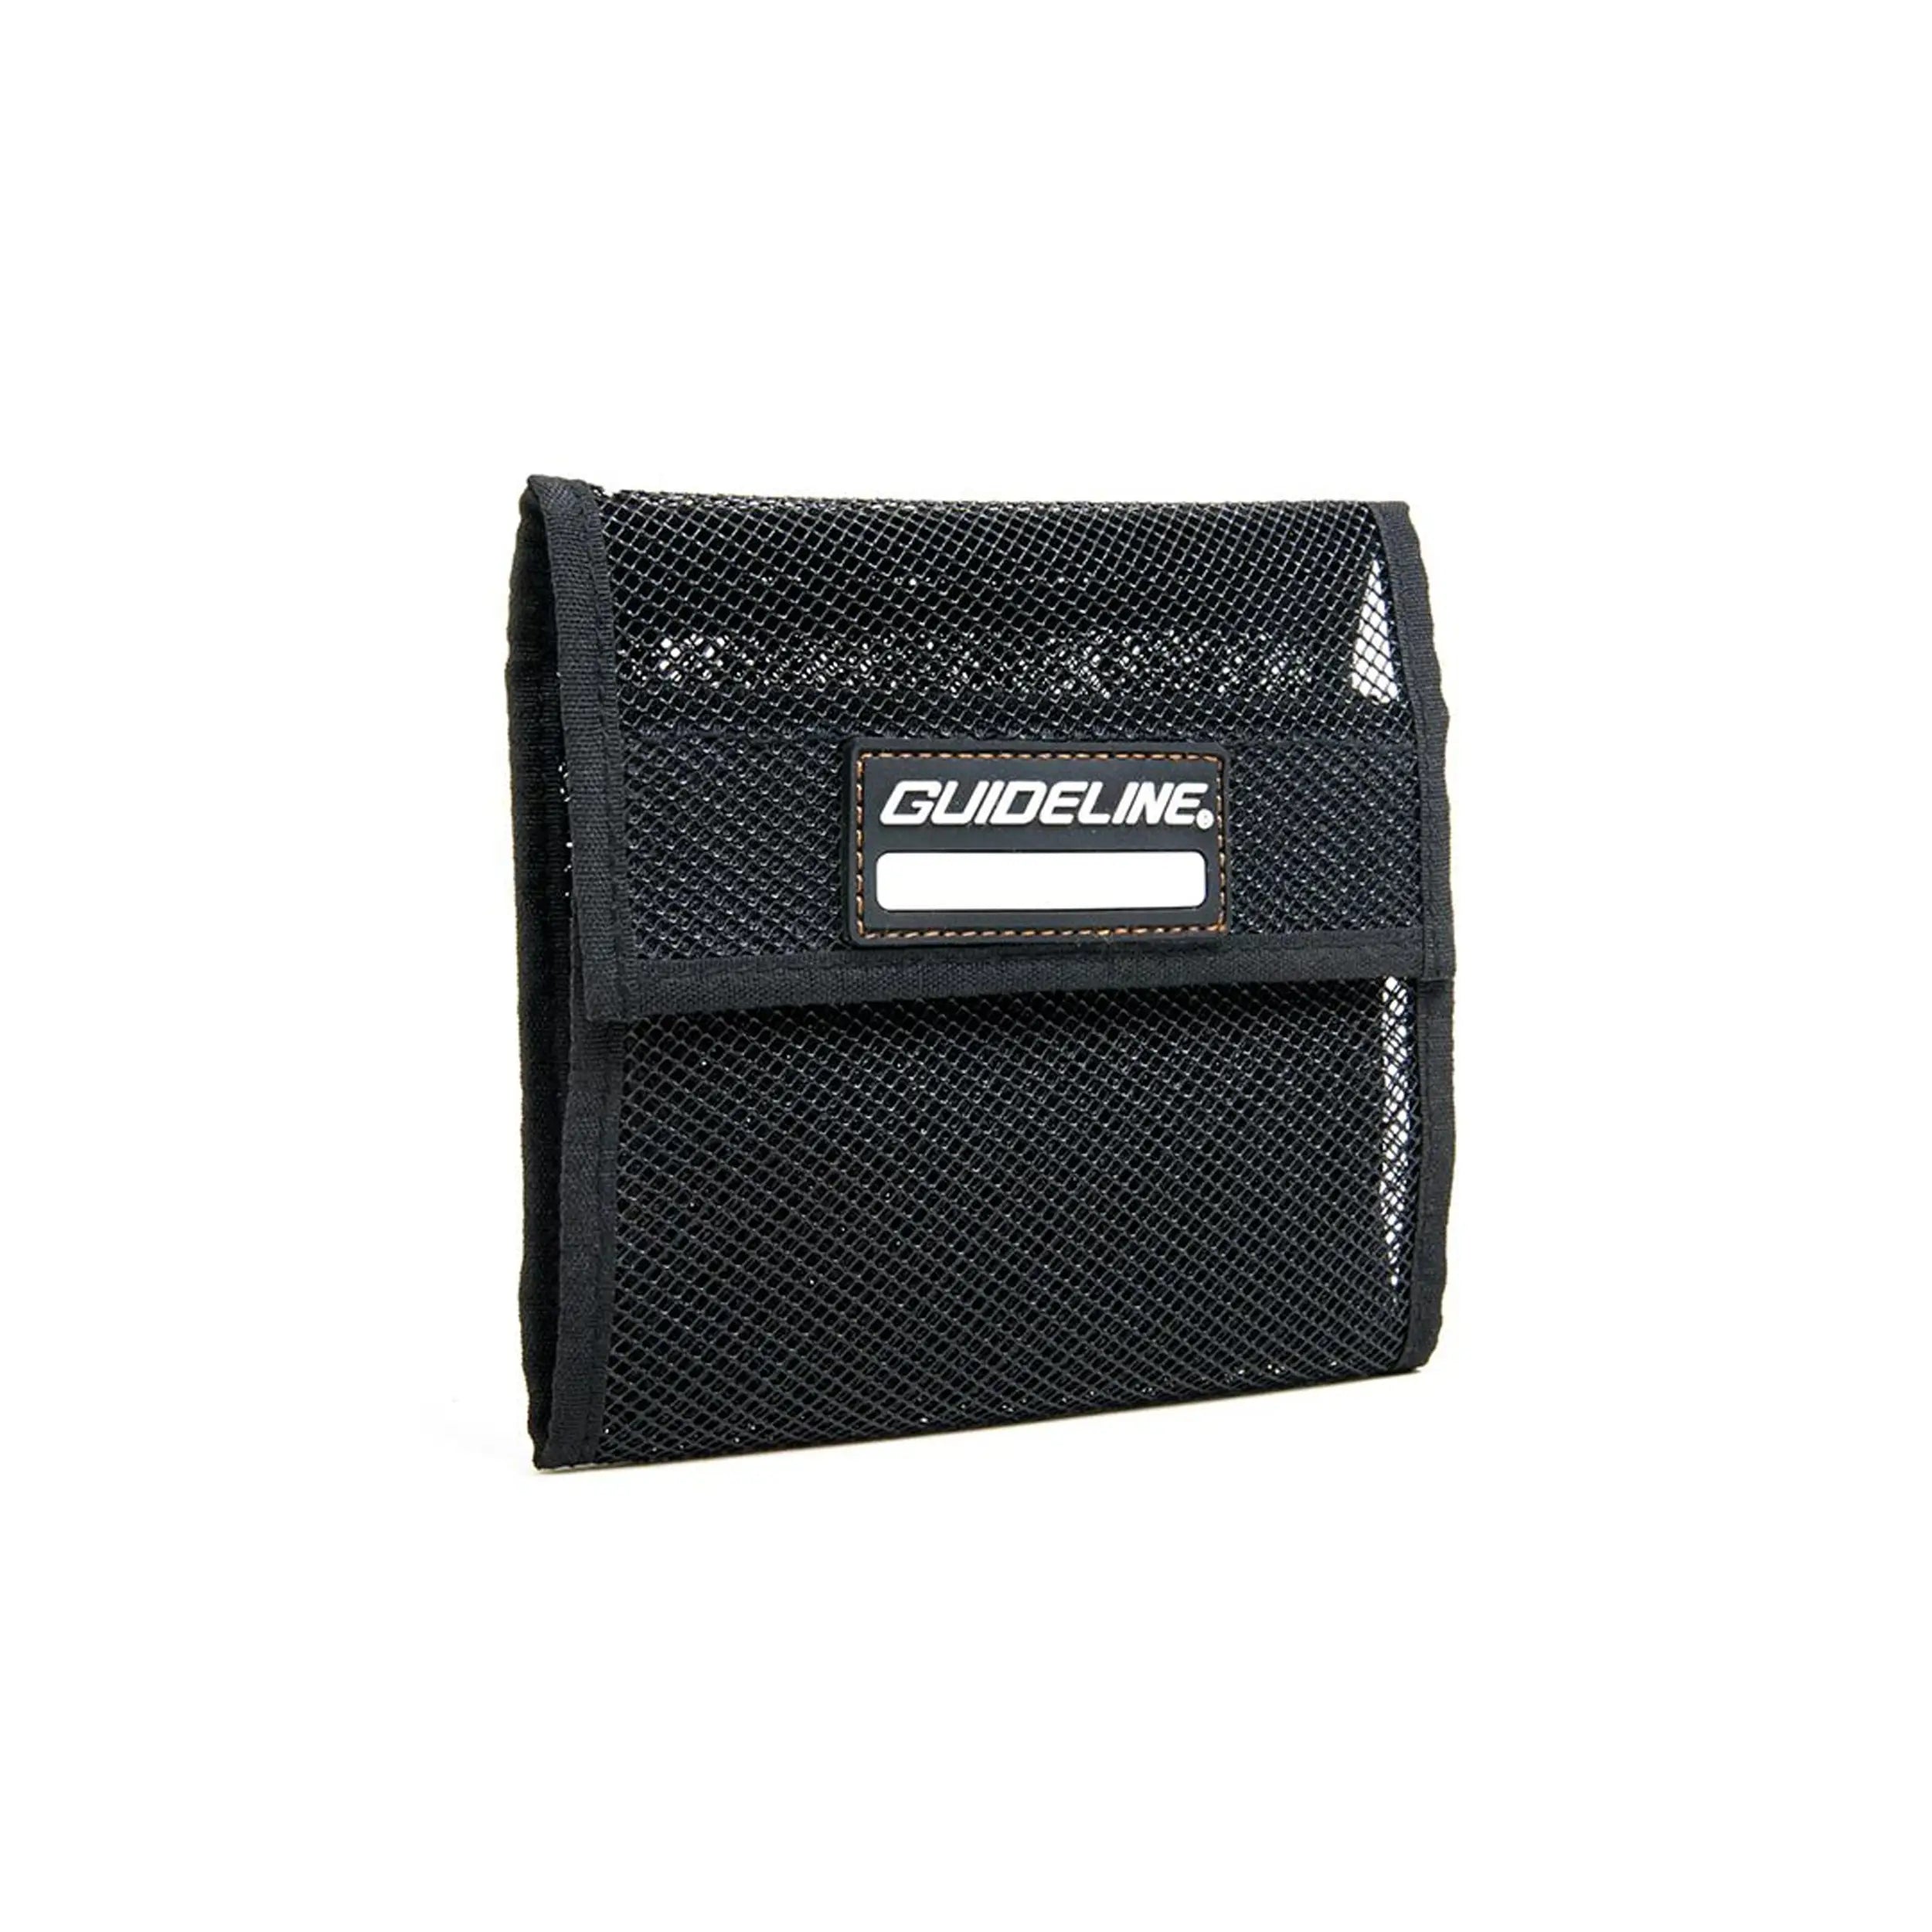 Mesh Wallet for 4D Body and Tips - Hooké